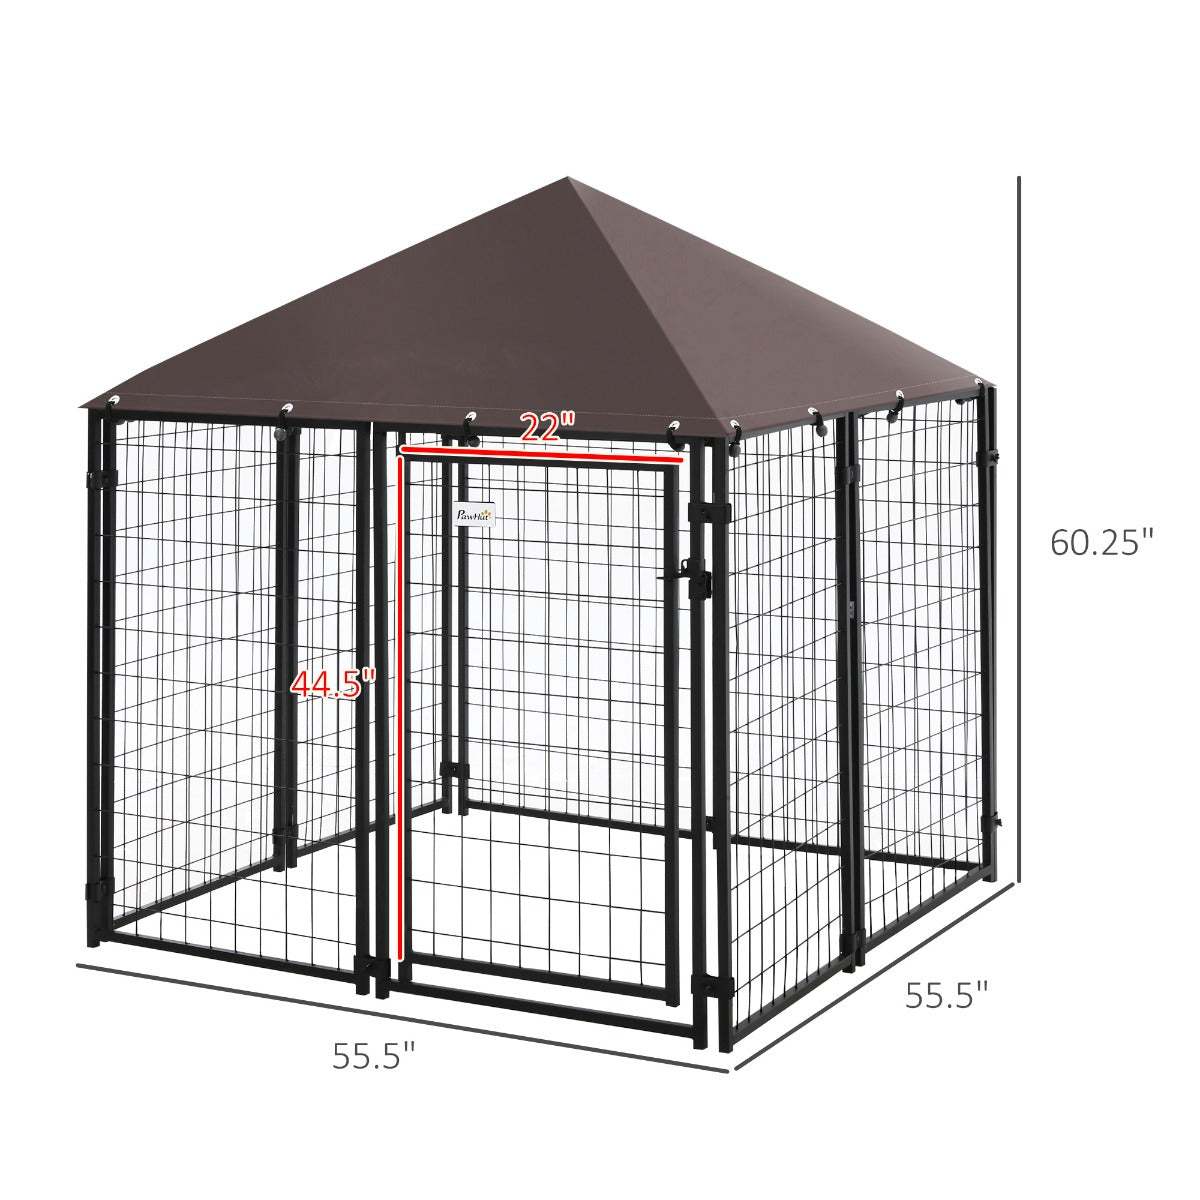 Carevas Large Lockable Outdoor Dog House Kennel with Water-resistant Roof for Small and Medium Sized Pets